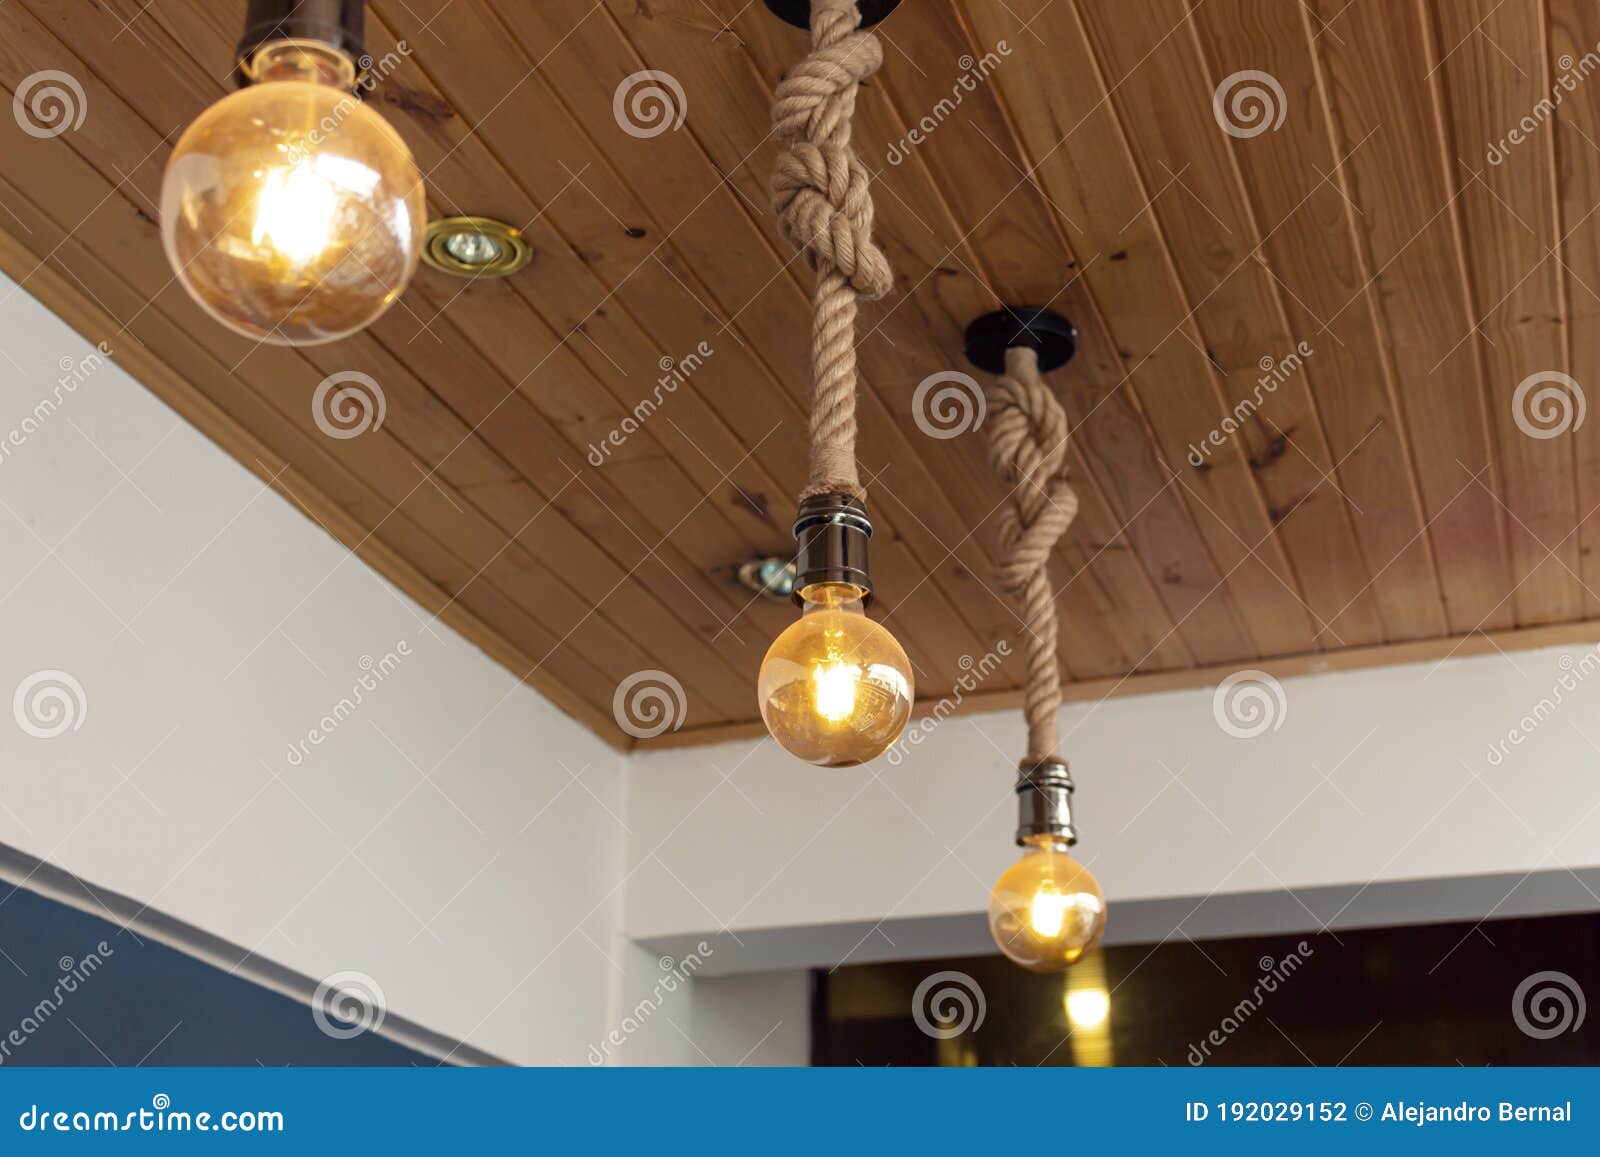 three artesanal yellow light bulbes with wooden roof and blue & white paiting